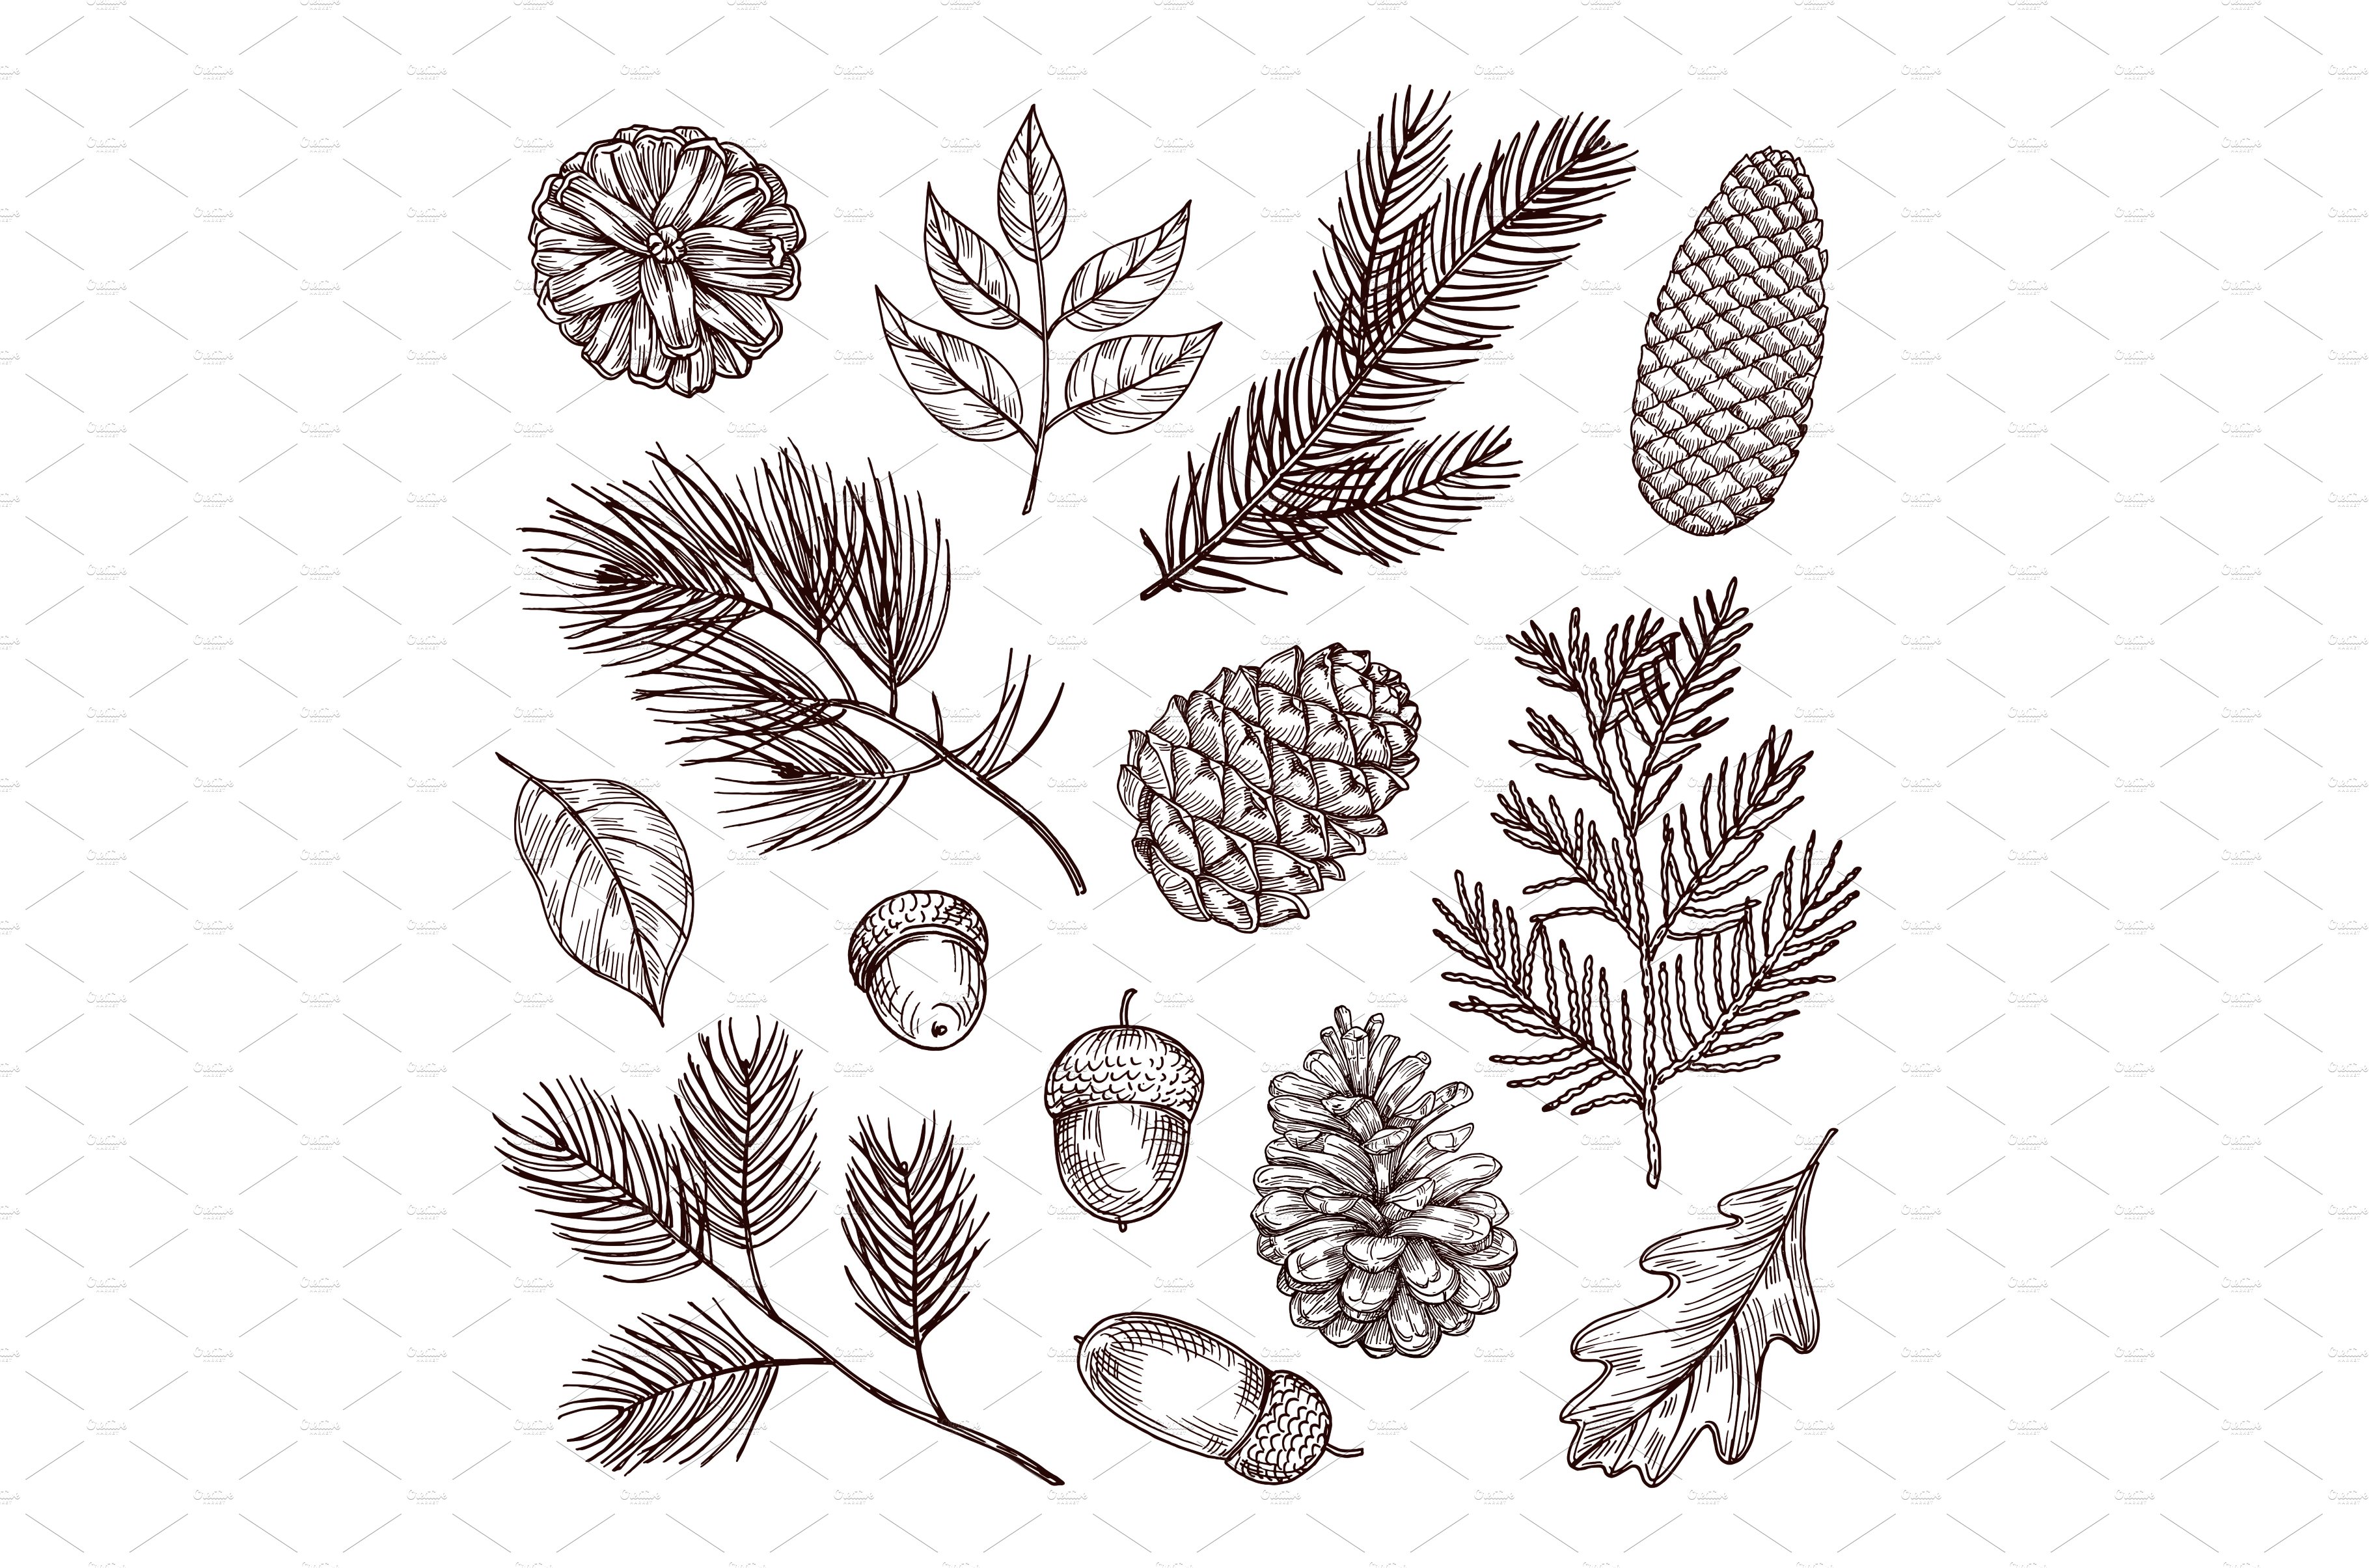 Sketch fir branches. Acorns and pine cover image.